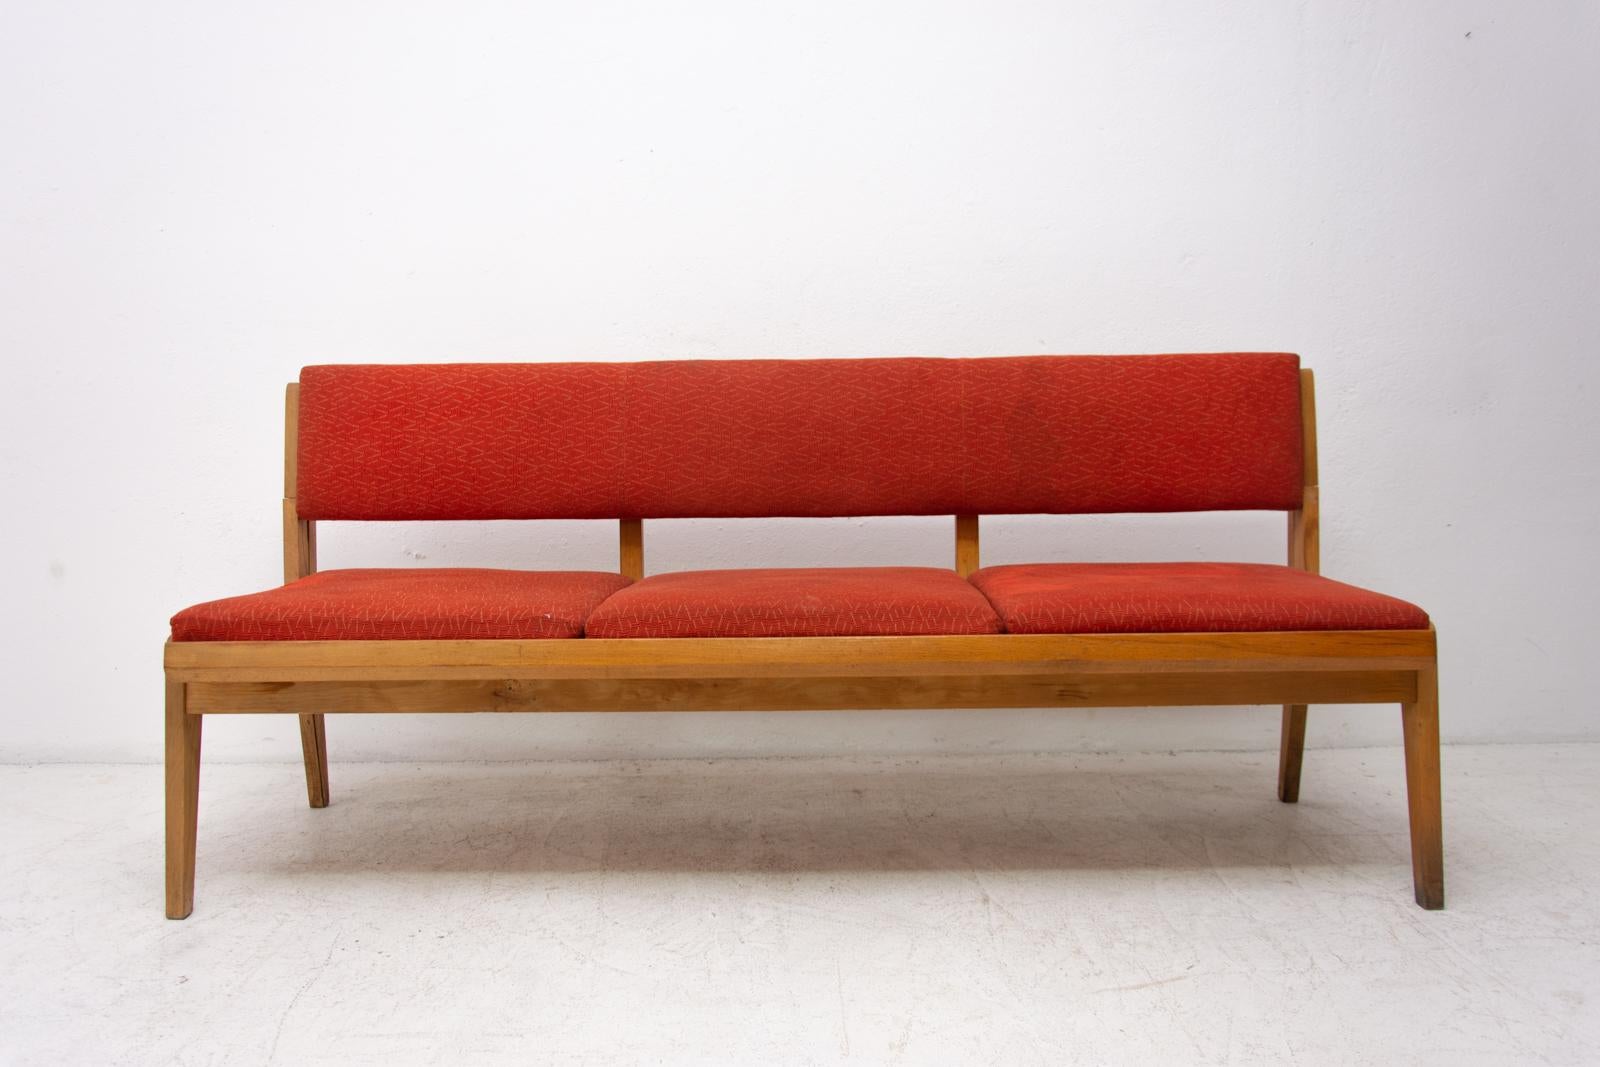 Midcentury folding sofa-bench made in the former Czechoslovakia in the 1960s. It features very attractive and simple design. Material: fabric, beechwood. The seating is composed of 4 removable upholstered parts. These parts are in good condition,